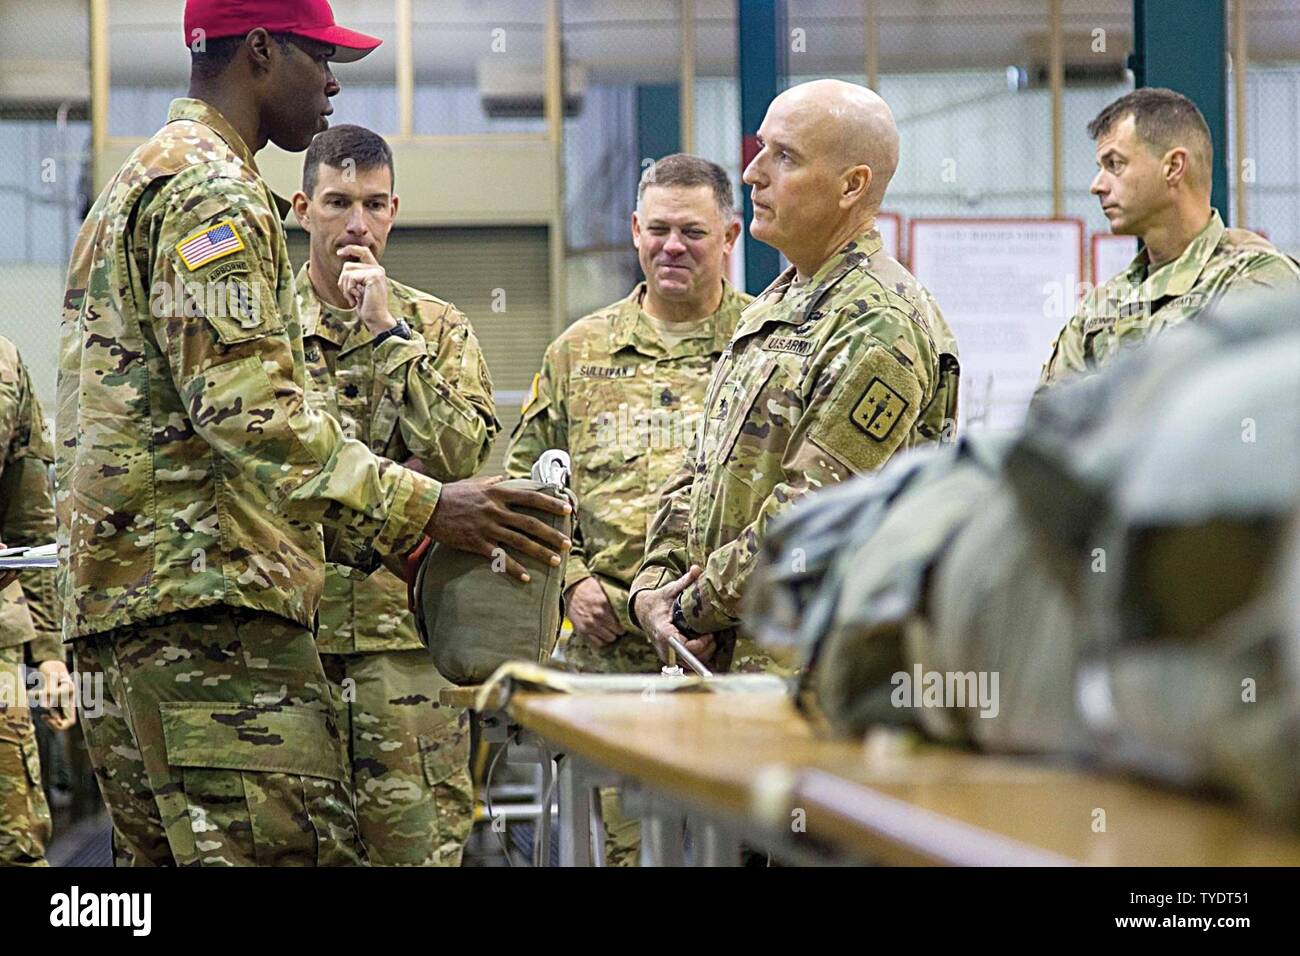 Then-Brig. Gen. Rodney Fogg – when serving as the 54th Quartermaster General Commandant – is briefed by Warrant Officer Joshua Hendrax, air drop systems technician, 11th Quartermaster Company, 189th Combat Sustainment Support Battalion, about the reserve parachutes during a visit with leaders from the 82nd Airborne Division Sustainment Brigade to Fort Bragg, N.C., in 2016. Fogg inquired how the challenges each location endures could be addressed to improve Paratrooper and equipment readiness and some new obstacles they may encounter as they continue operations. Stock Photo